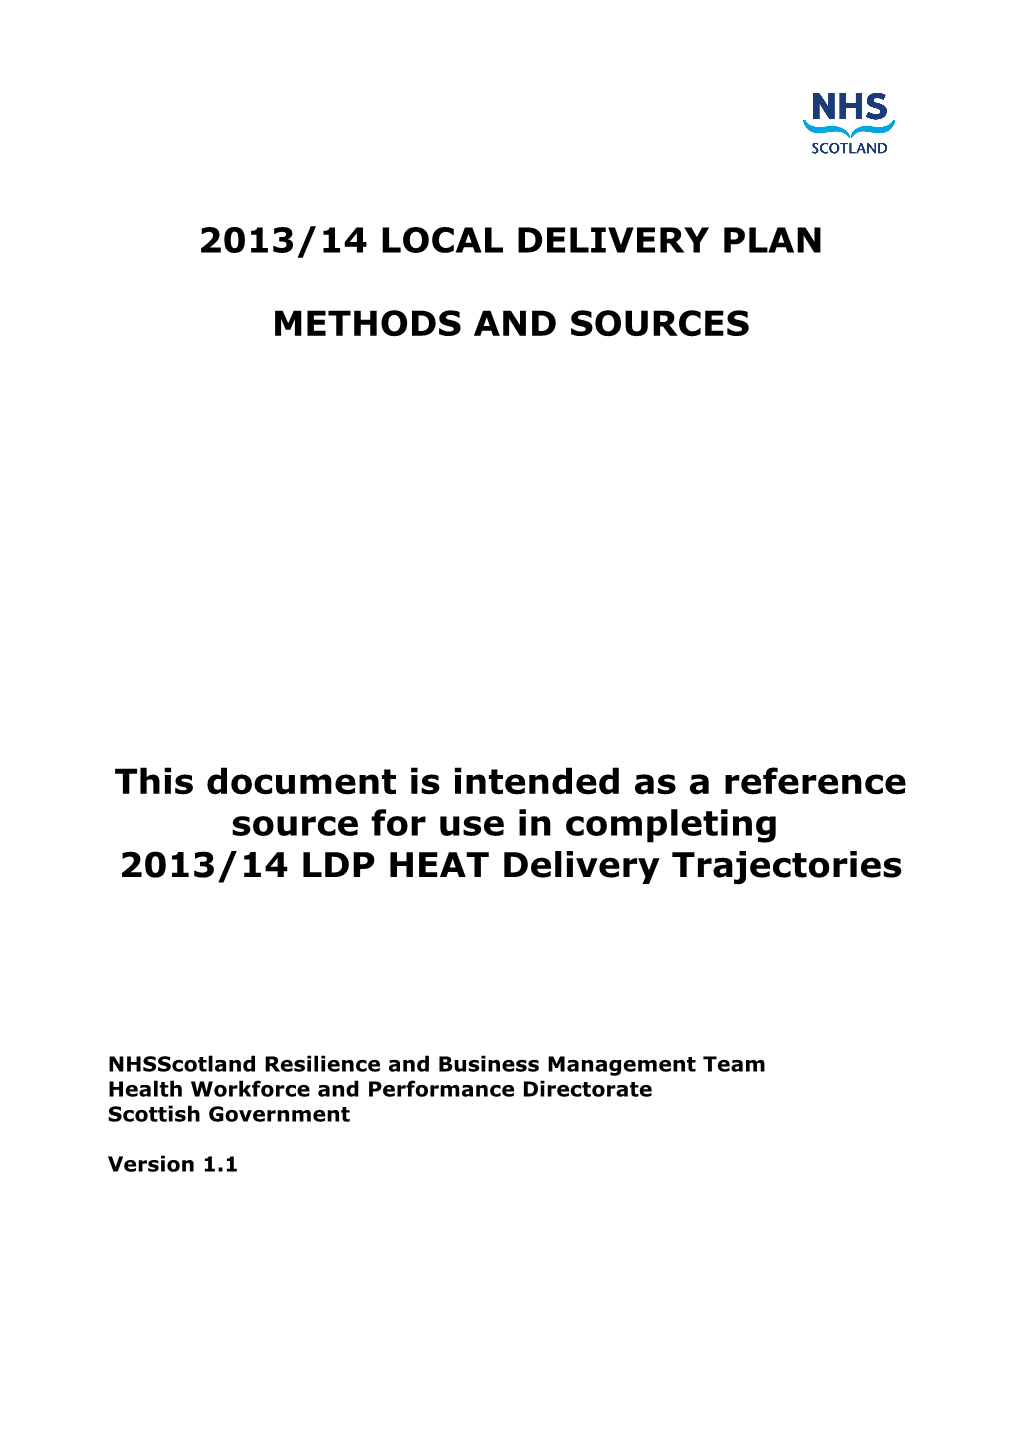 LDP 2013 2014 Methods and Sources